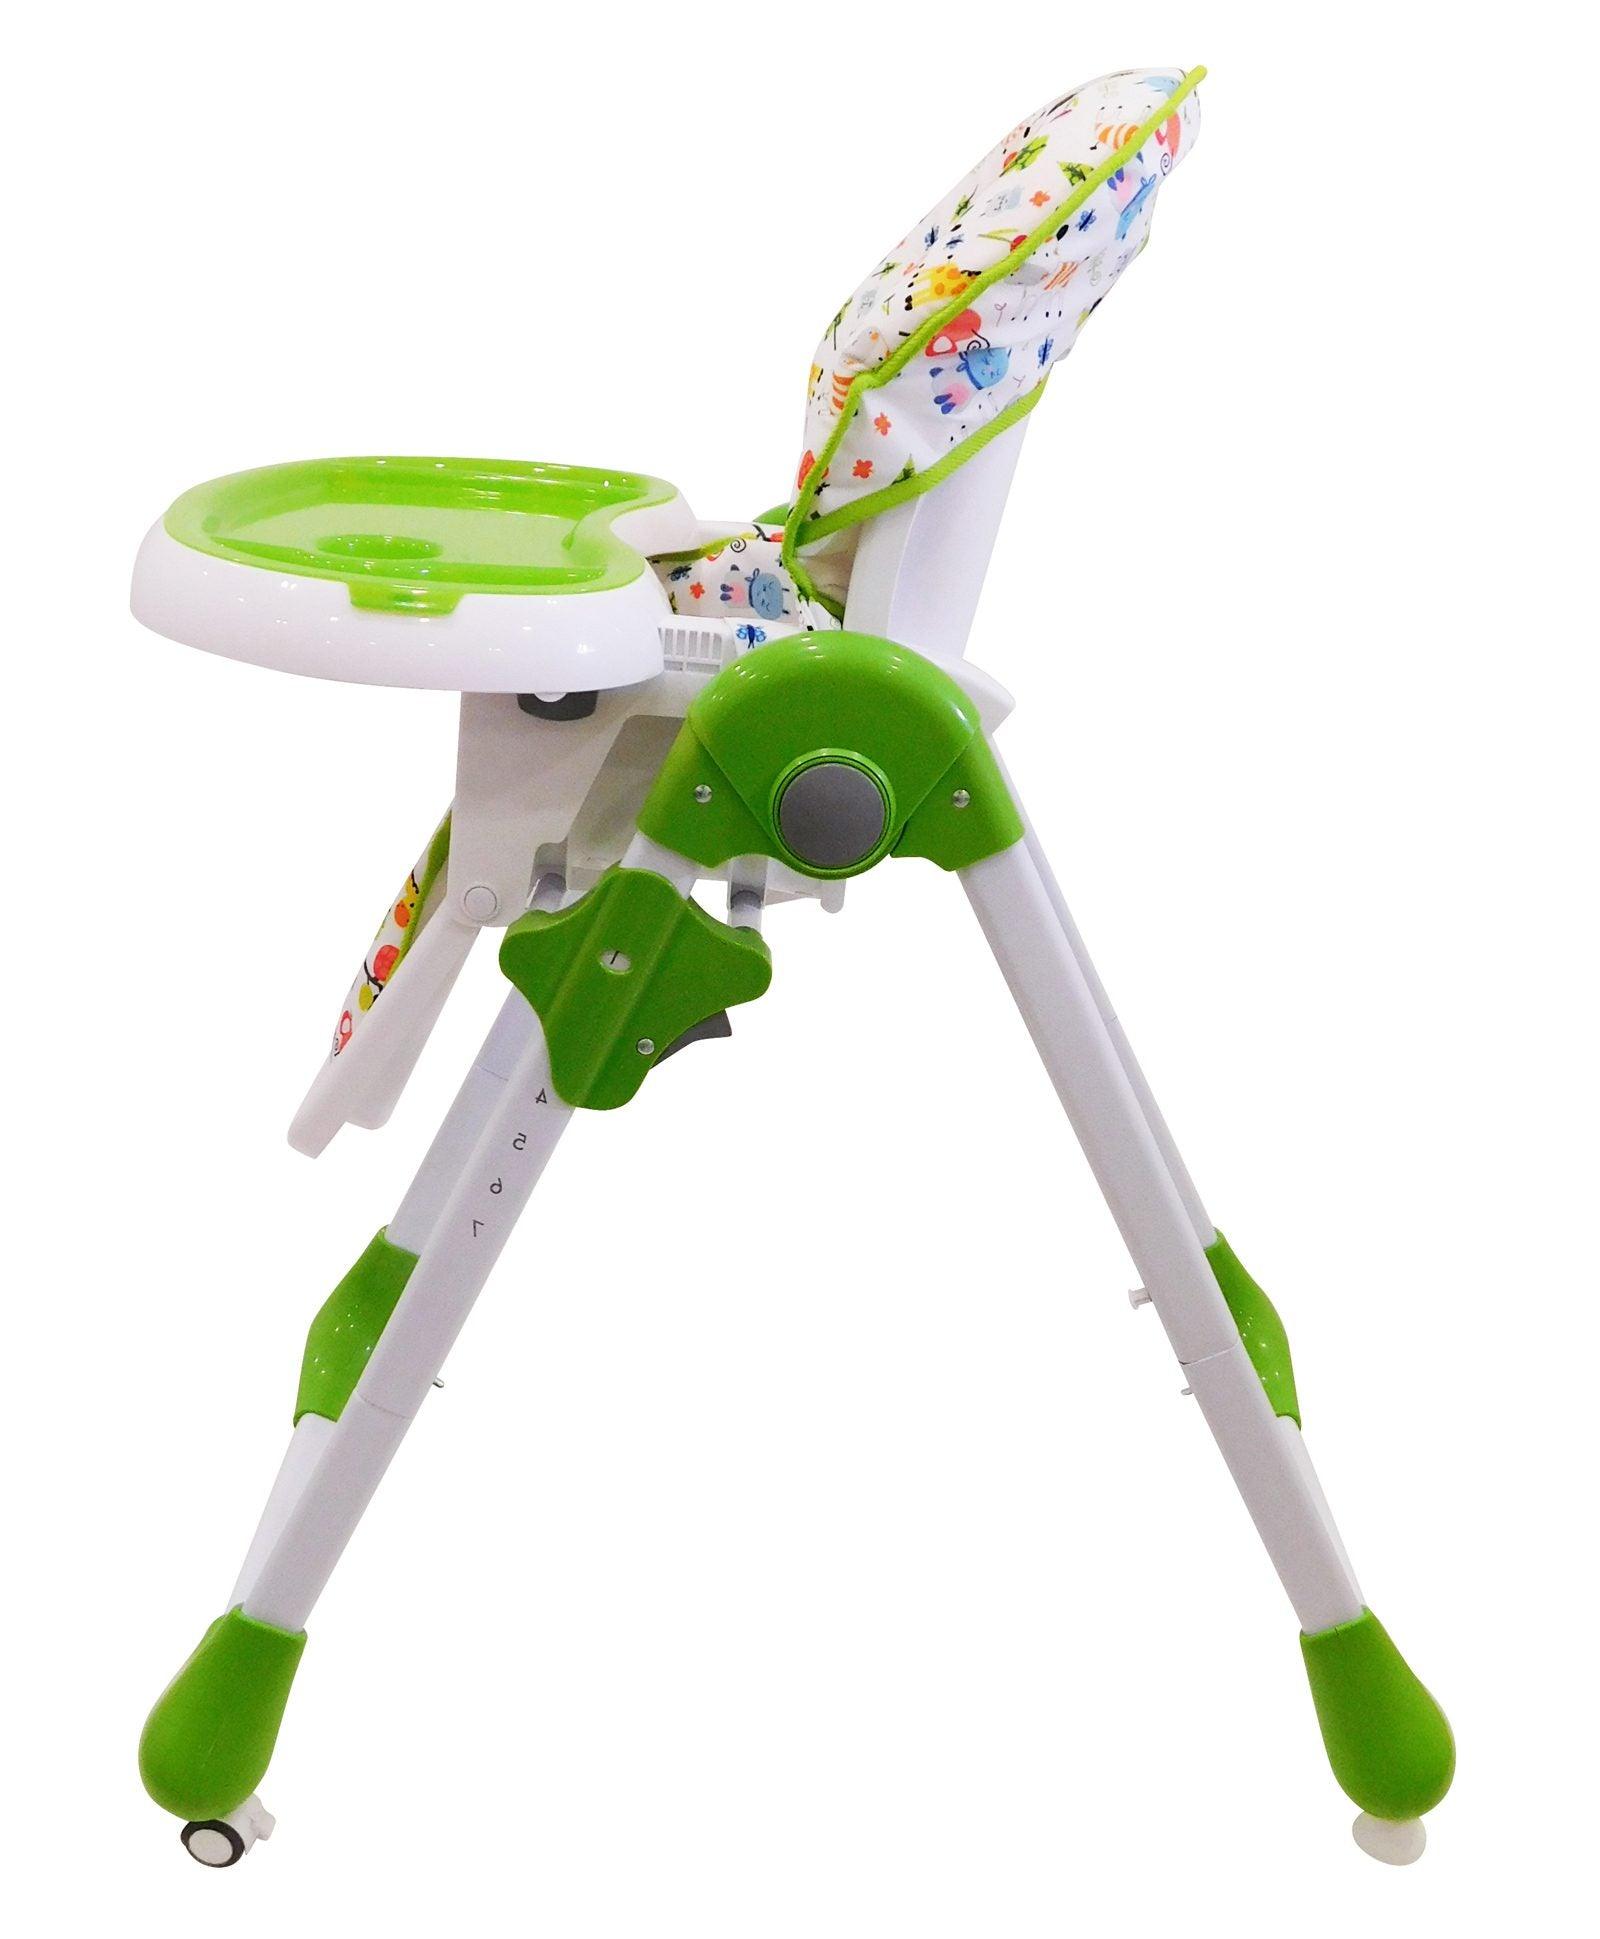 PATOYS | Asalvo 14900 High Chair with Wheels Jungle Print - Green - PATOYS